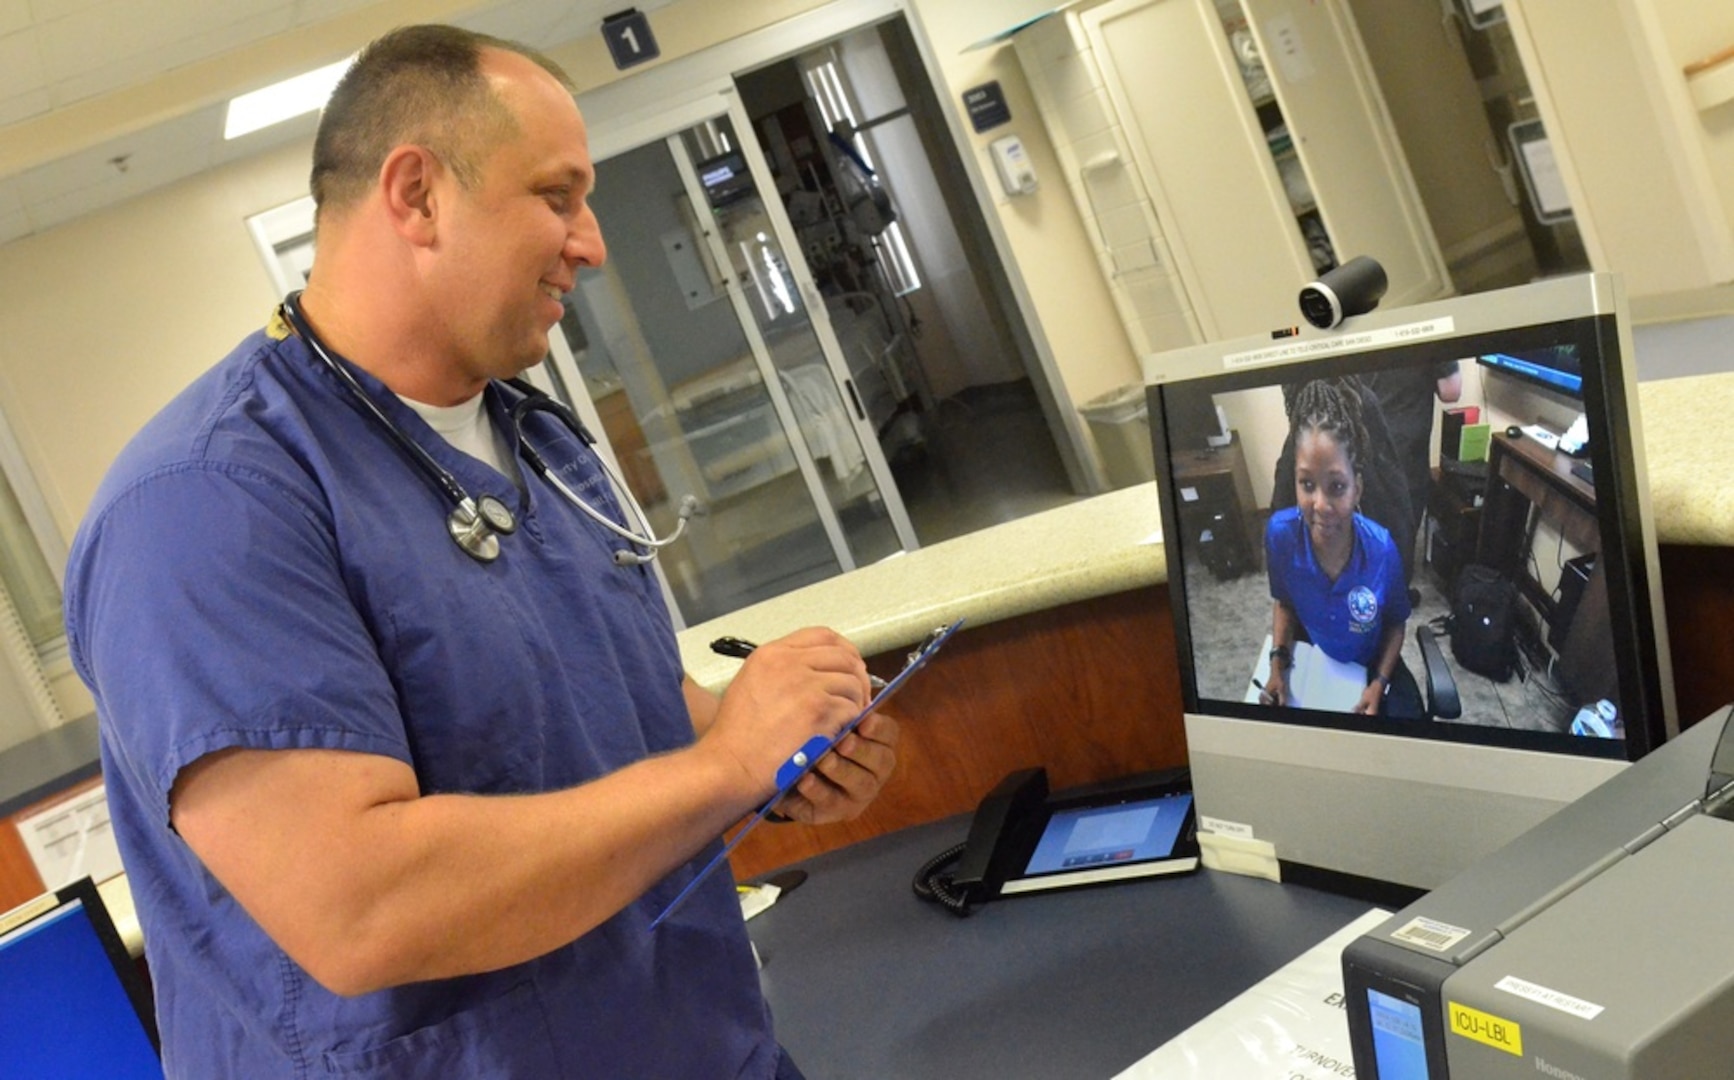 Lt. Michael White, a nurse at Naval Hospital Jacksonville’s intensive care unit, uses telehealth to discuss patient statuses and recommendations with Tiffany Ingram, a nurse at Naval Medical Center San Diego. Telehealth is the use of telecommunications and information technologies to provide health assessment, diagnosis, treatment, consultation, education, and health-related information across distances. White, a native of Boise, Idaho, says, “Telehealth provides us the opportunity to access those critical care resources to help mitigate staffing shortages. From a nursing standpoint, it gives us a second pair of critical care nursing eyes on the patient data to potentially catch any signs or symptoms that might get missed by the assigned nurse.” (U.S. Navy photo by Jacob Sippel, Naval Hospital Jacksonville/Released).